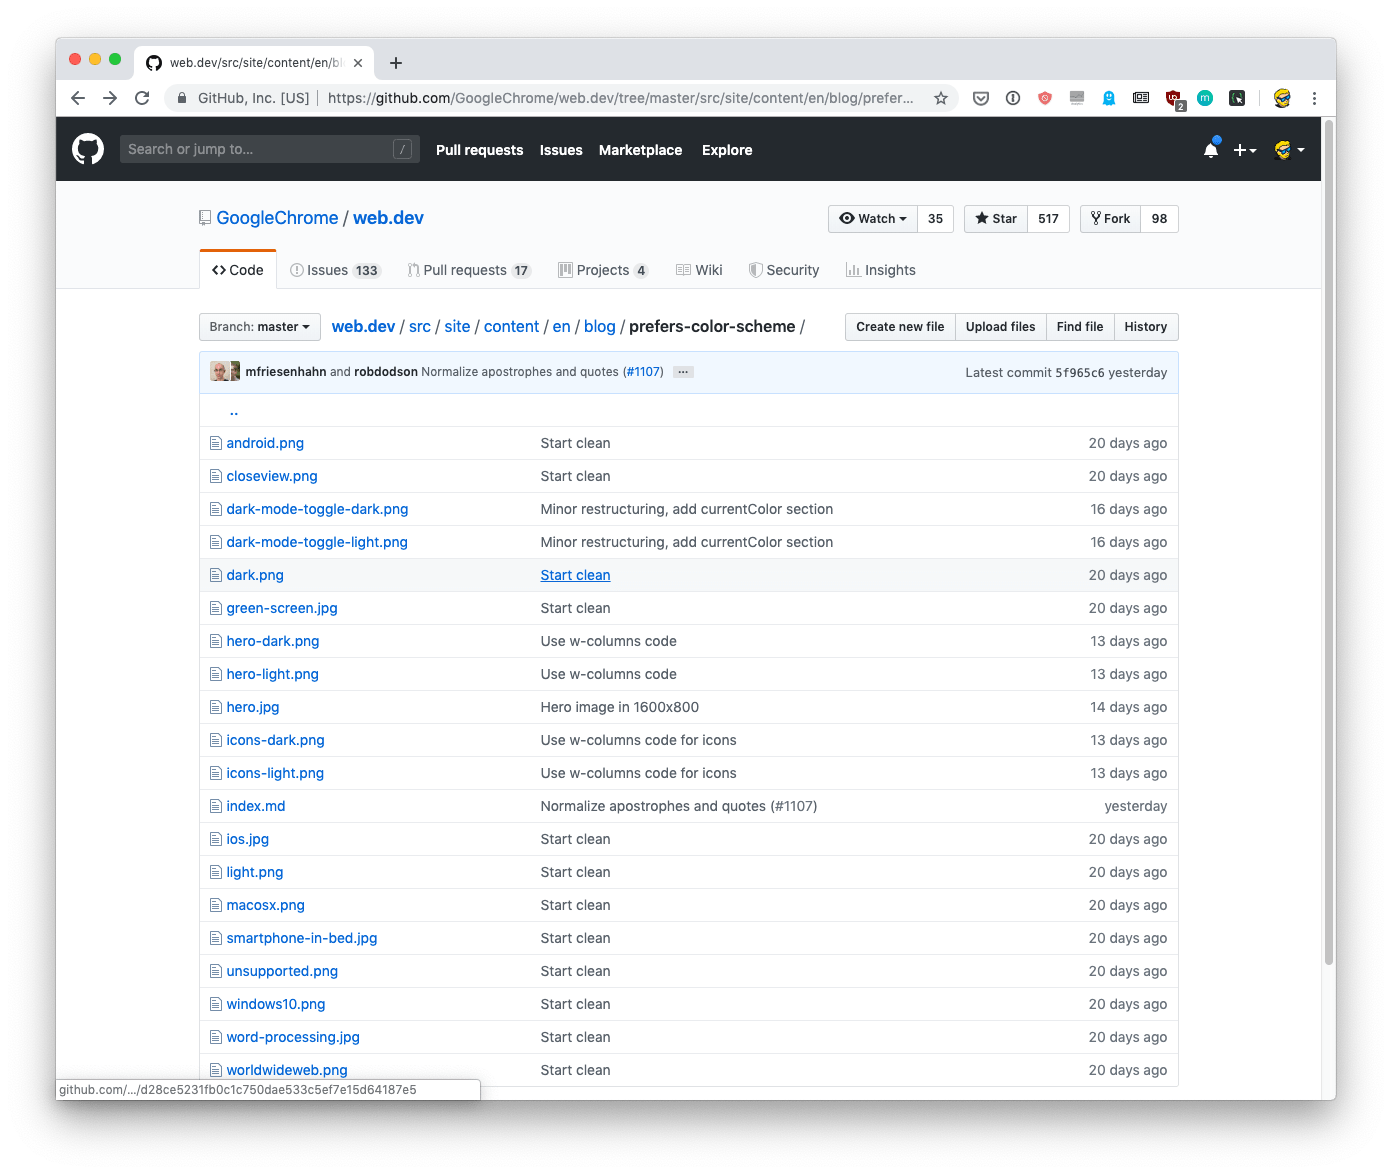 The github folder of the article